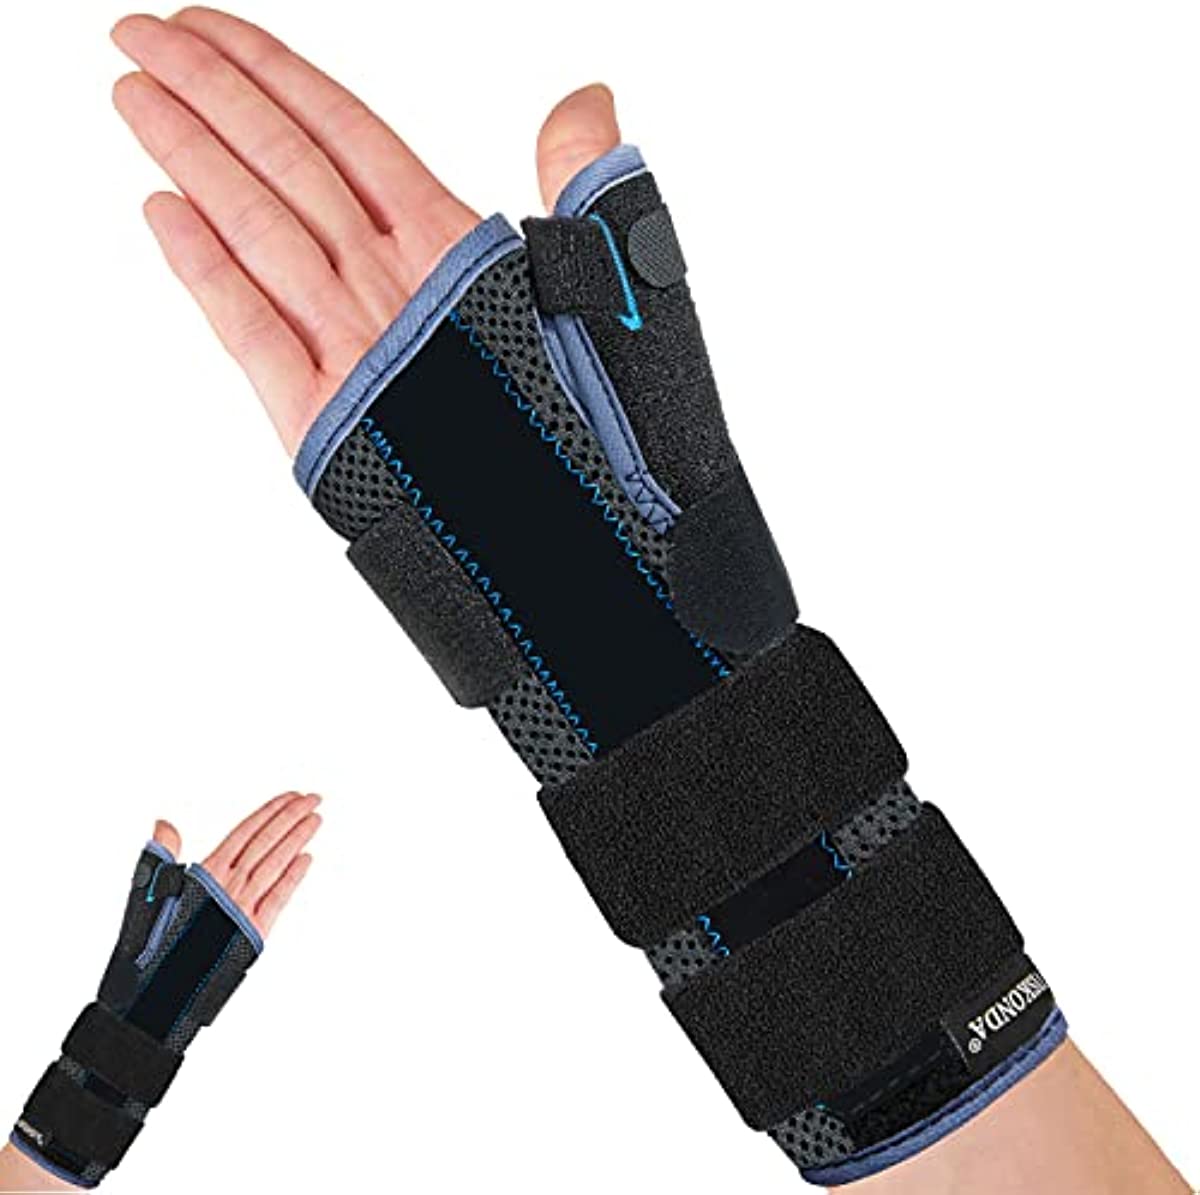 VISKONDA Wrist Brace Thumb Immobilizer Splint Support for De Quervain\'s Tenosynovitis,Carpal Tunnel Syndrome,Stabilizer for Arthritis,Wrist ganglion cyst,Sprains,Sports Injuries Pain Relief